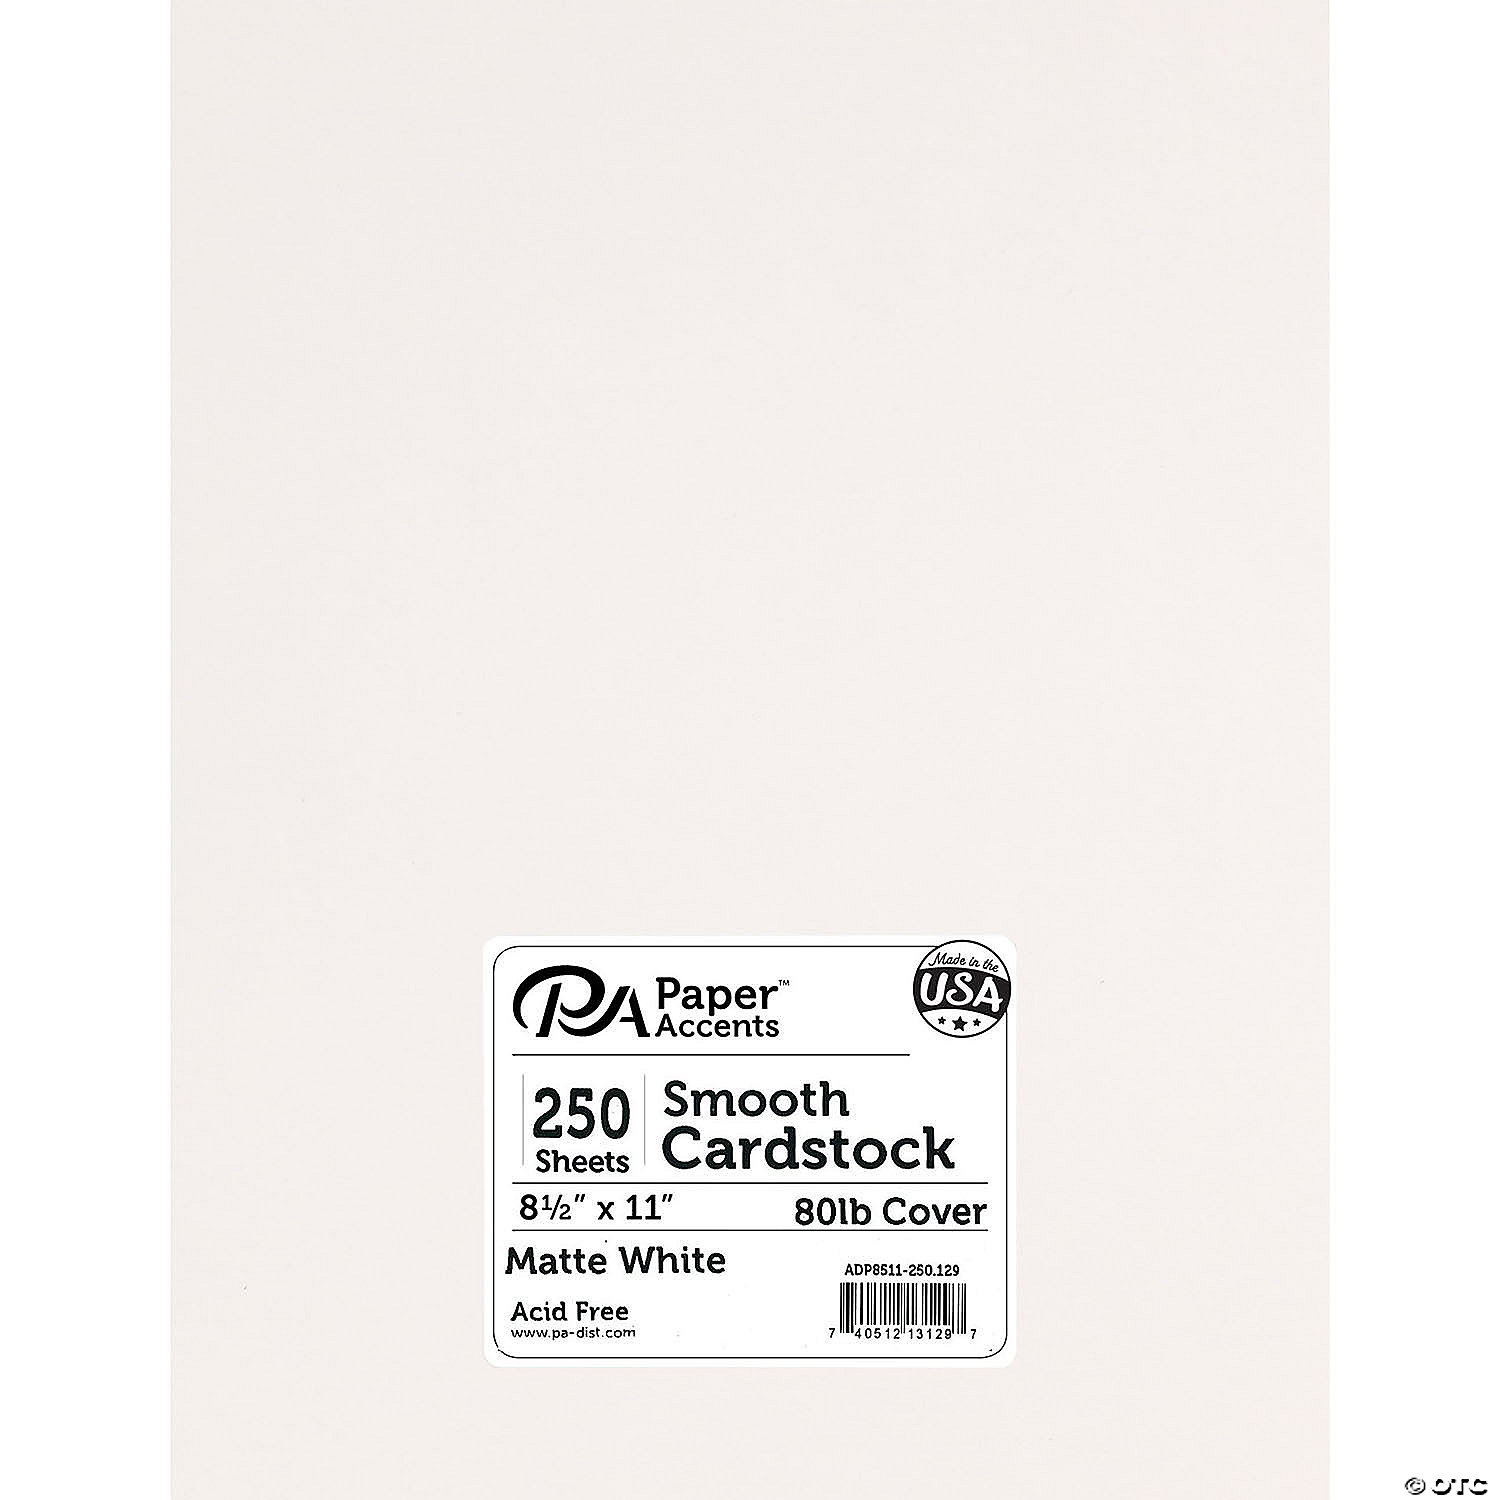 Classic CREST Recycled 100 BRIGHT WHITE Card Stock 8.5x11